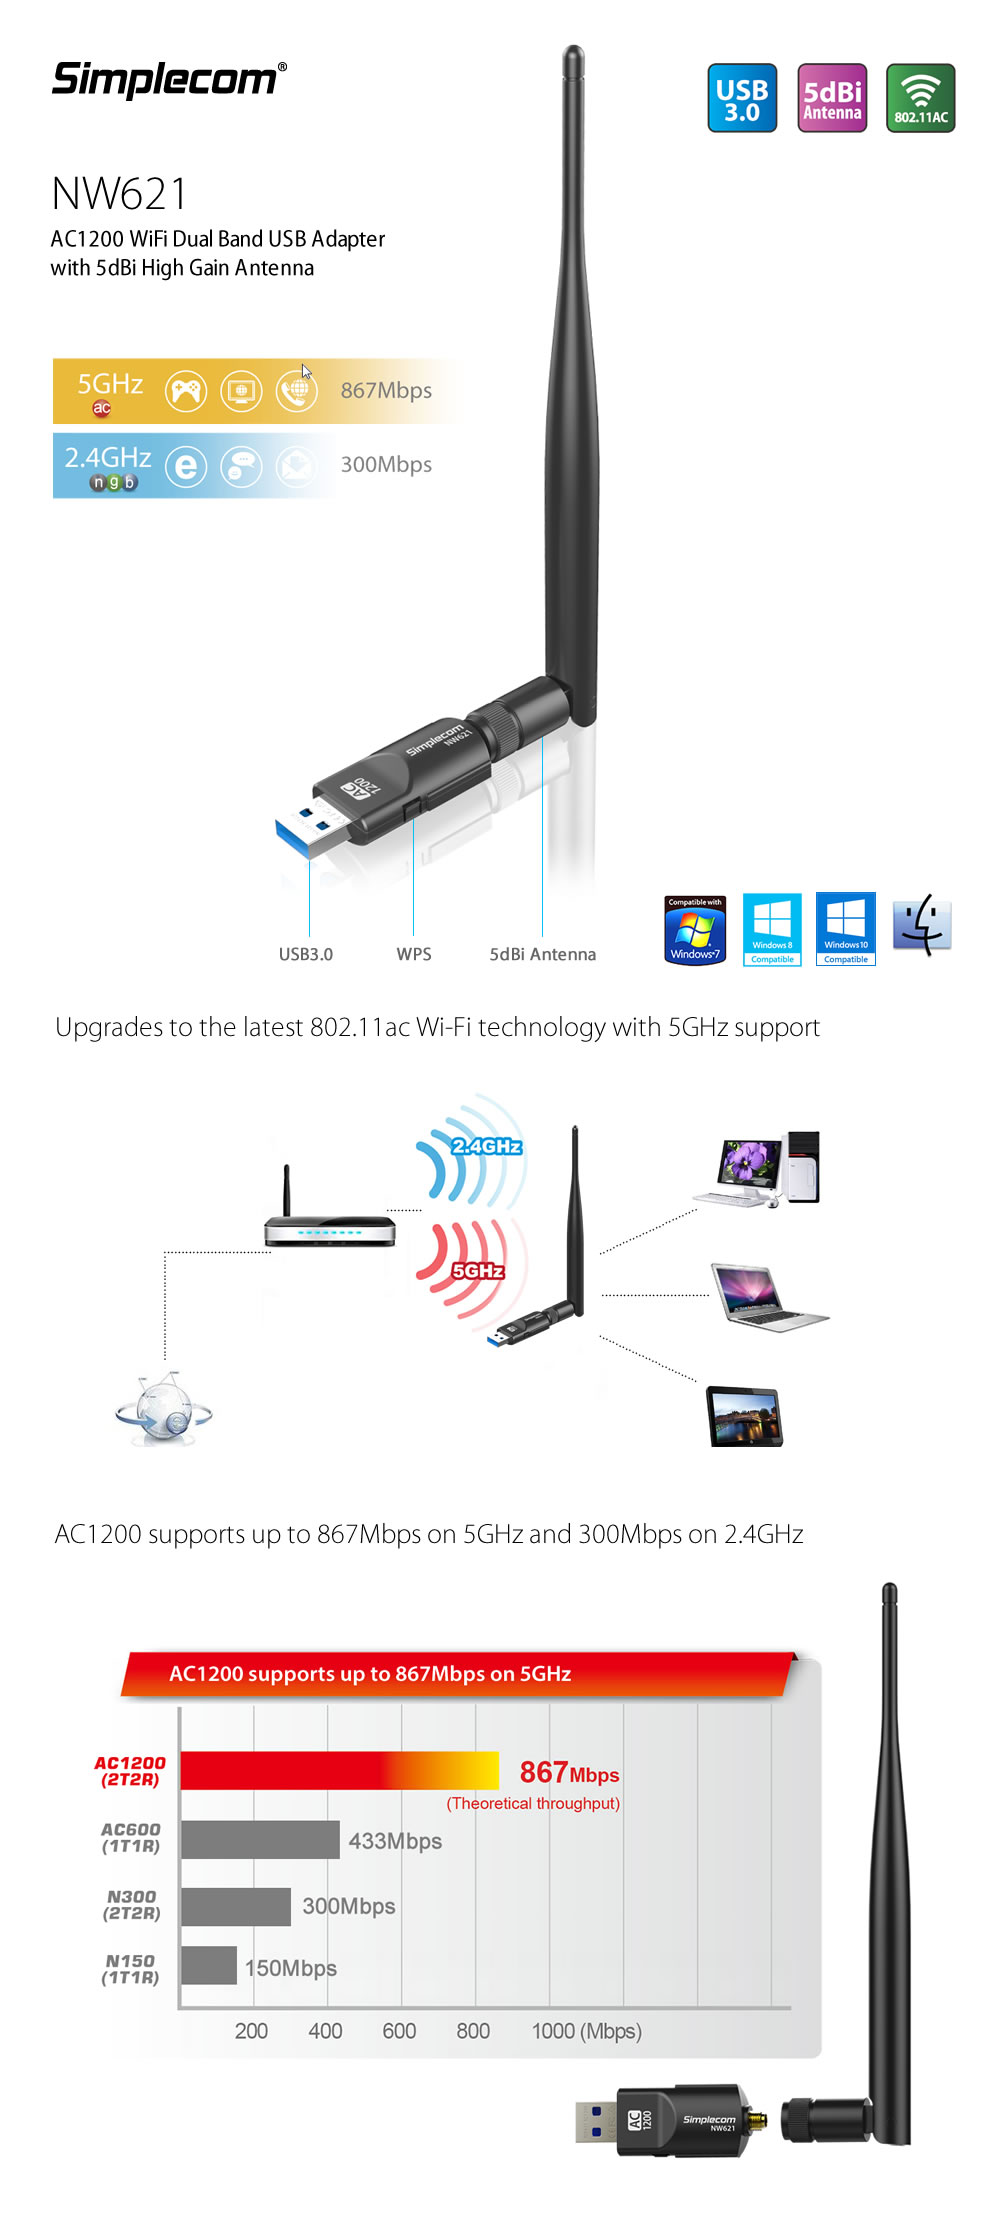 Simplecom NW621 AC1200 WiFi Dual Band USB Adapter with 5dBi High Gain Antenna 1